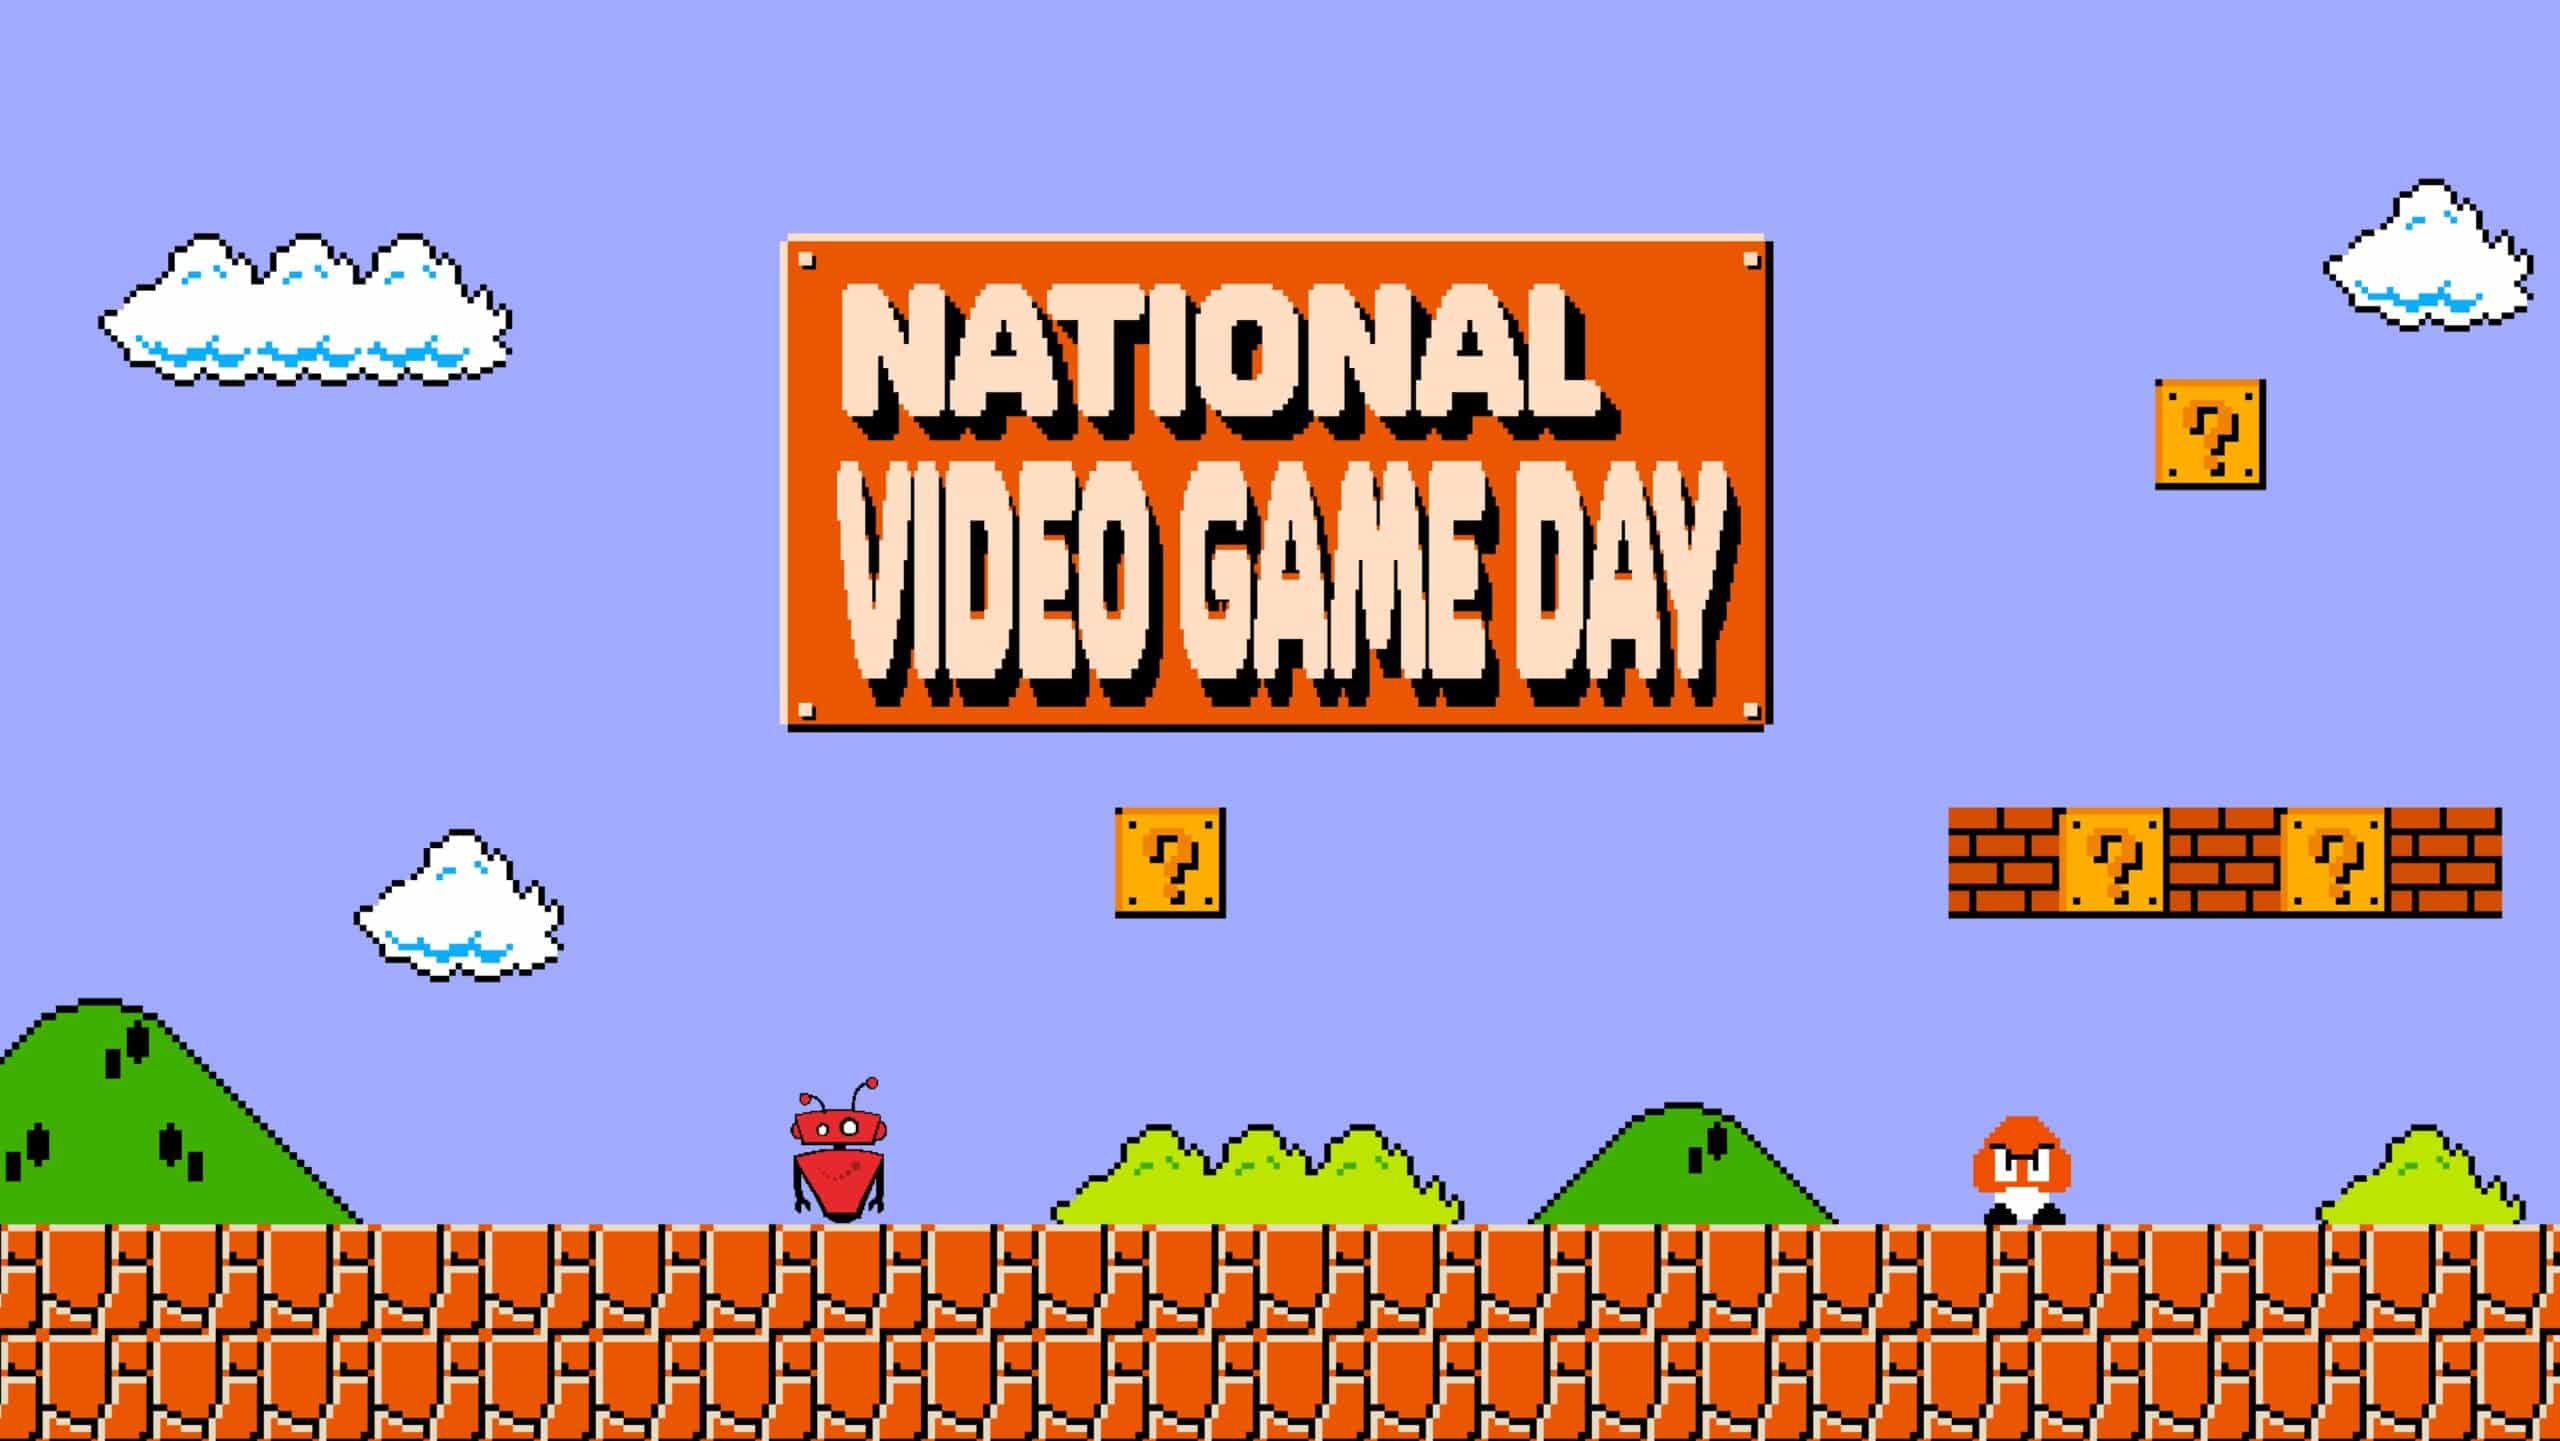 Game On! Celebrate National Video Game Day!